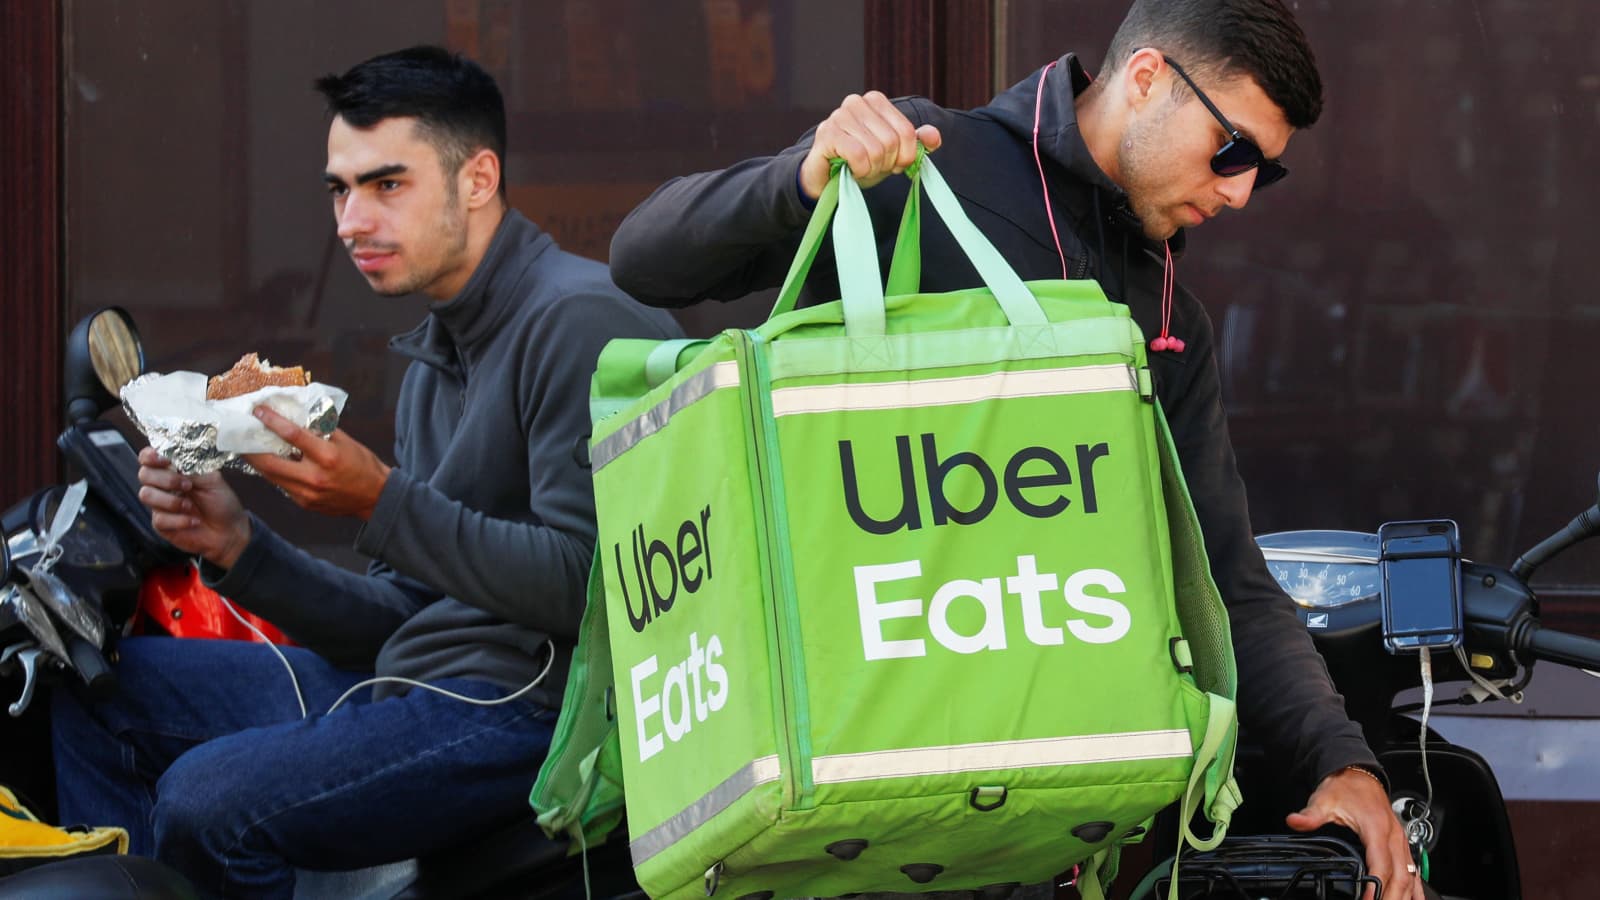 Grubhub, Uber Eats and DoorDash drove an online food delivery boom